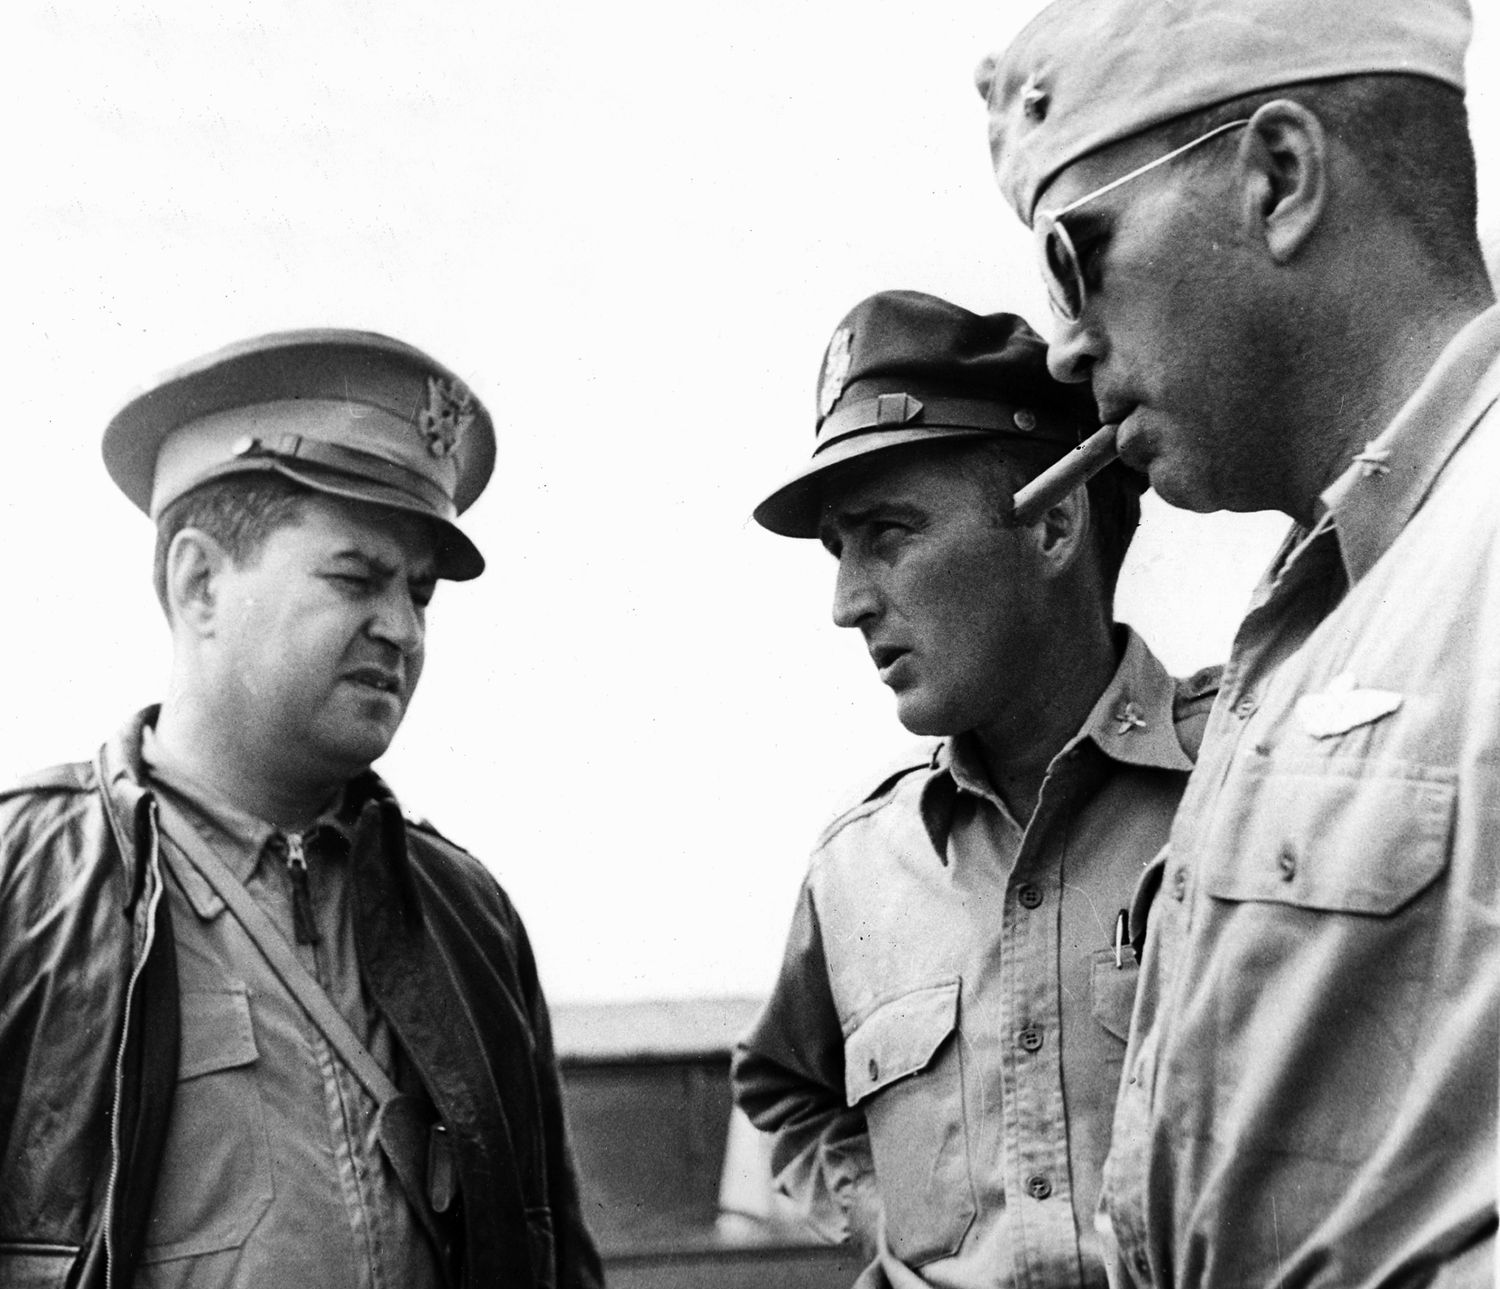 Standing left to right, Major General Curtis LeMay, commander of the 20th Bombardment Group confers with Colonel Dwight O. Monteith, forward echelon commander of the 20th, and Brigadier General La Verne “Blondie” Saunders at a base somewhere in China in 1944.